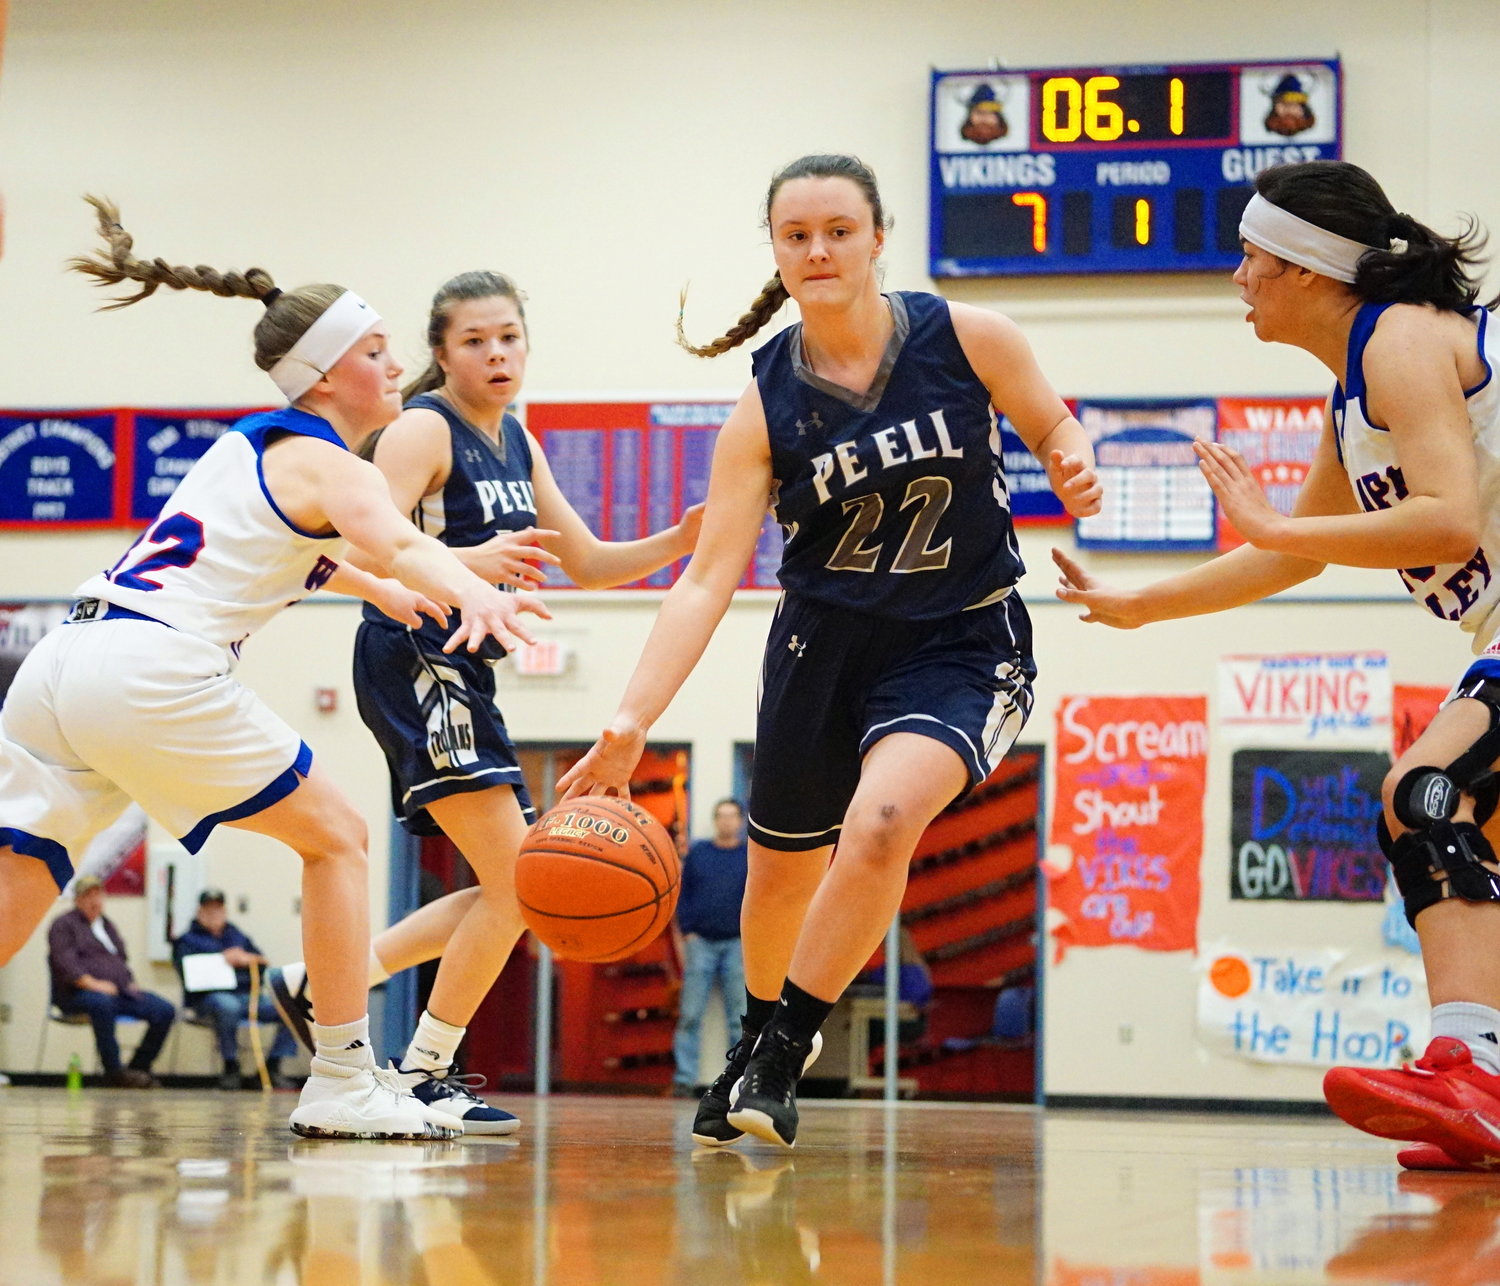 Trojan's Megan Krafczyk (22) dribbles the ball down court during a game against Willapa Valley Thursday night in Menlo.